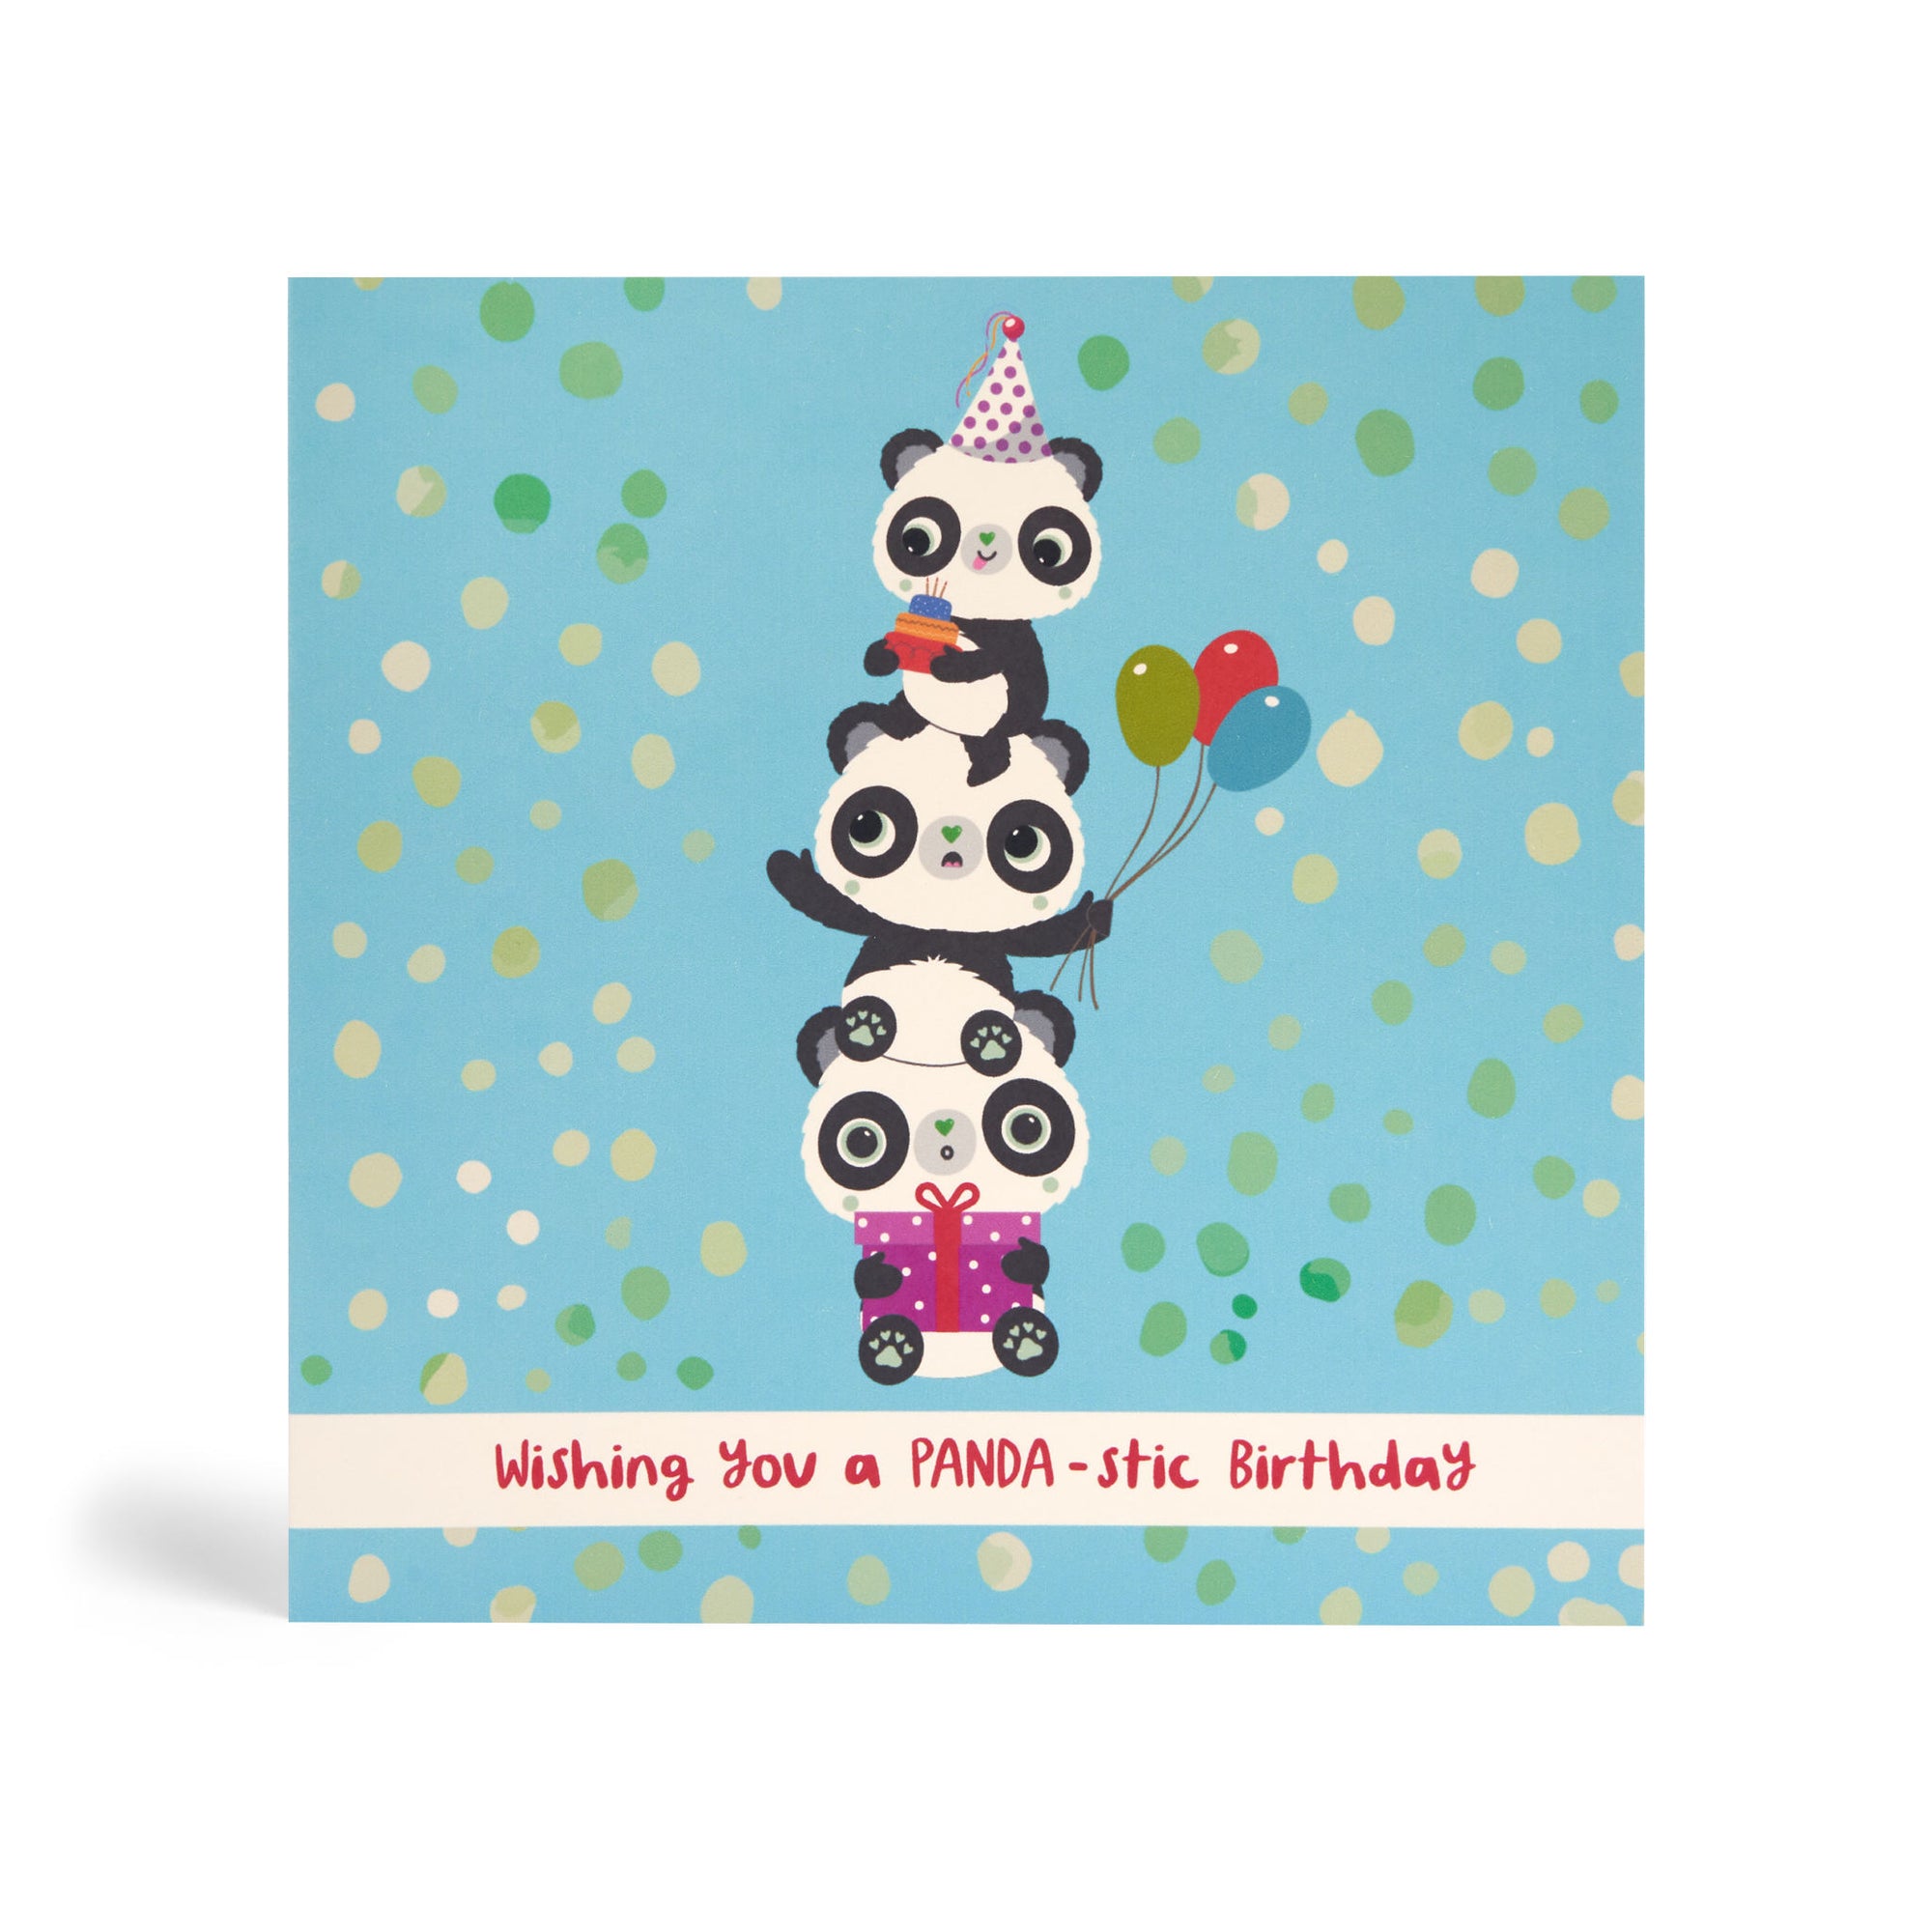 150mm square Blue with dots background eco-friendly, tree free, birthday greeting card with three Pandas Piggyback on top of each other. The top Panda is wearing a party hat and holding a cake, the middle Panda is holding balloons and the Panda at the bottom is sitting down and holding a purple present. The card says, wishing you a PANDA-stic Birthday.